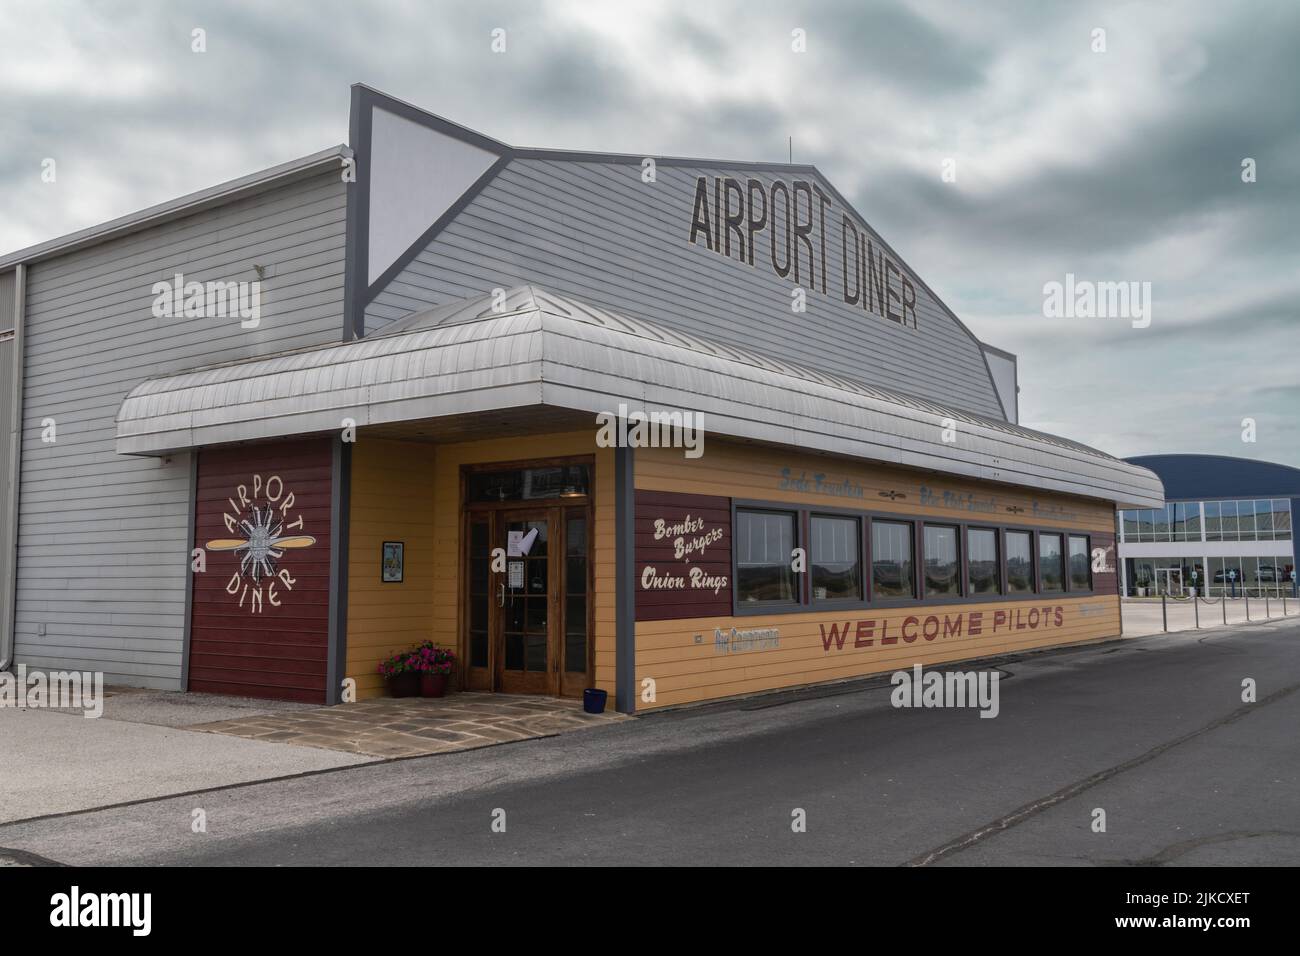 Fredericksburg, Texas - May 22, 2022: Exterior of the Airport Diner, located at the Hangar Hotel Stock Photo